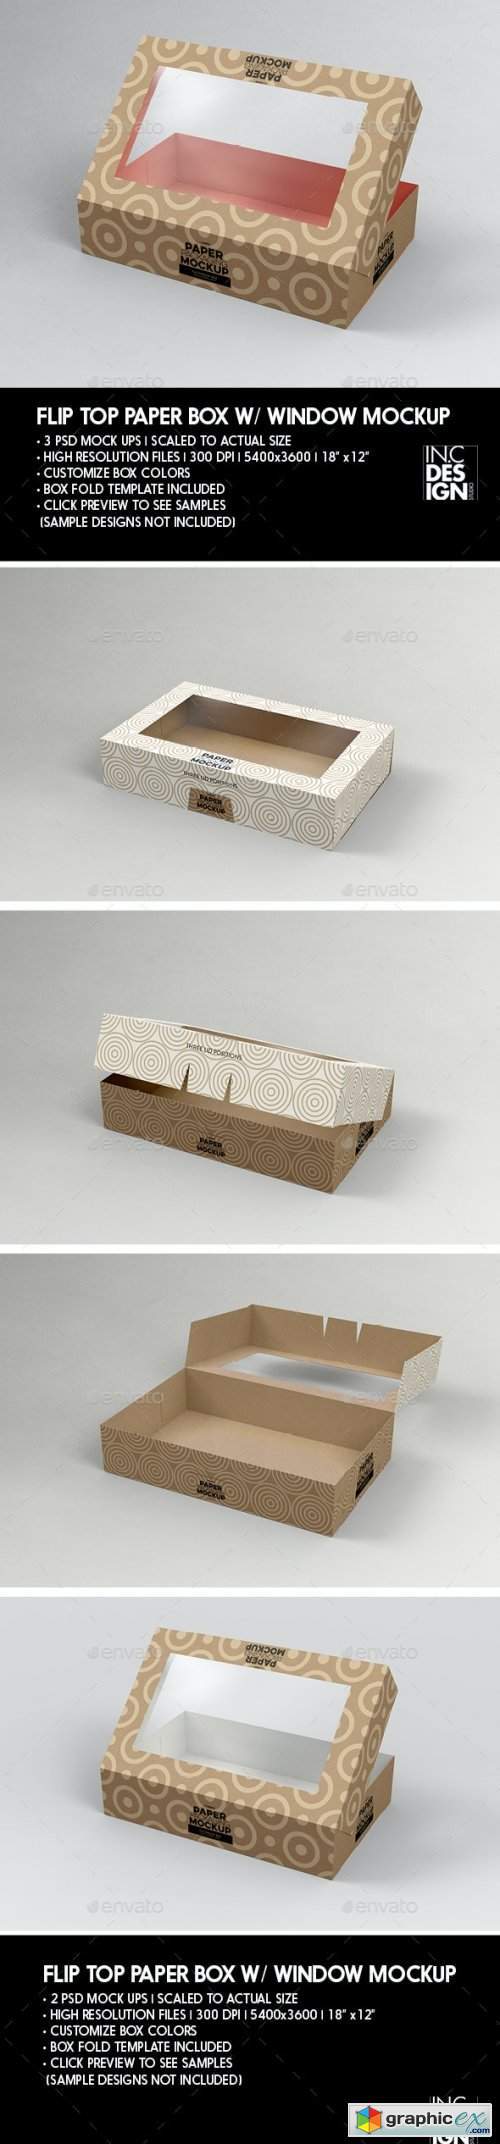 Paper Flip Top Box with Window Packaging Mockup